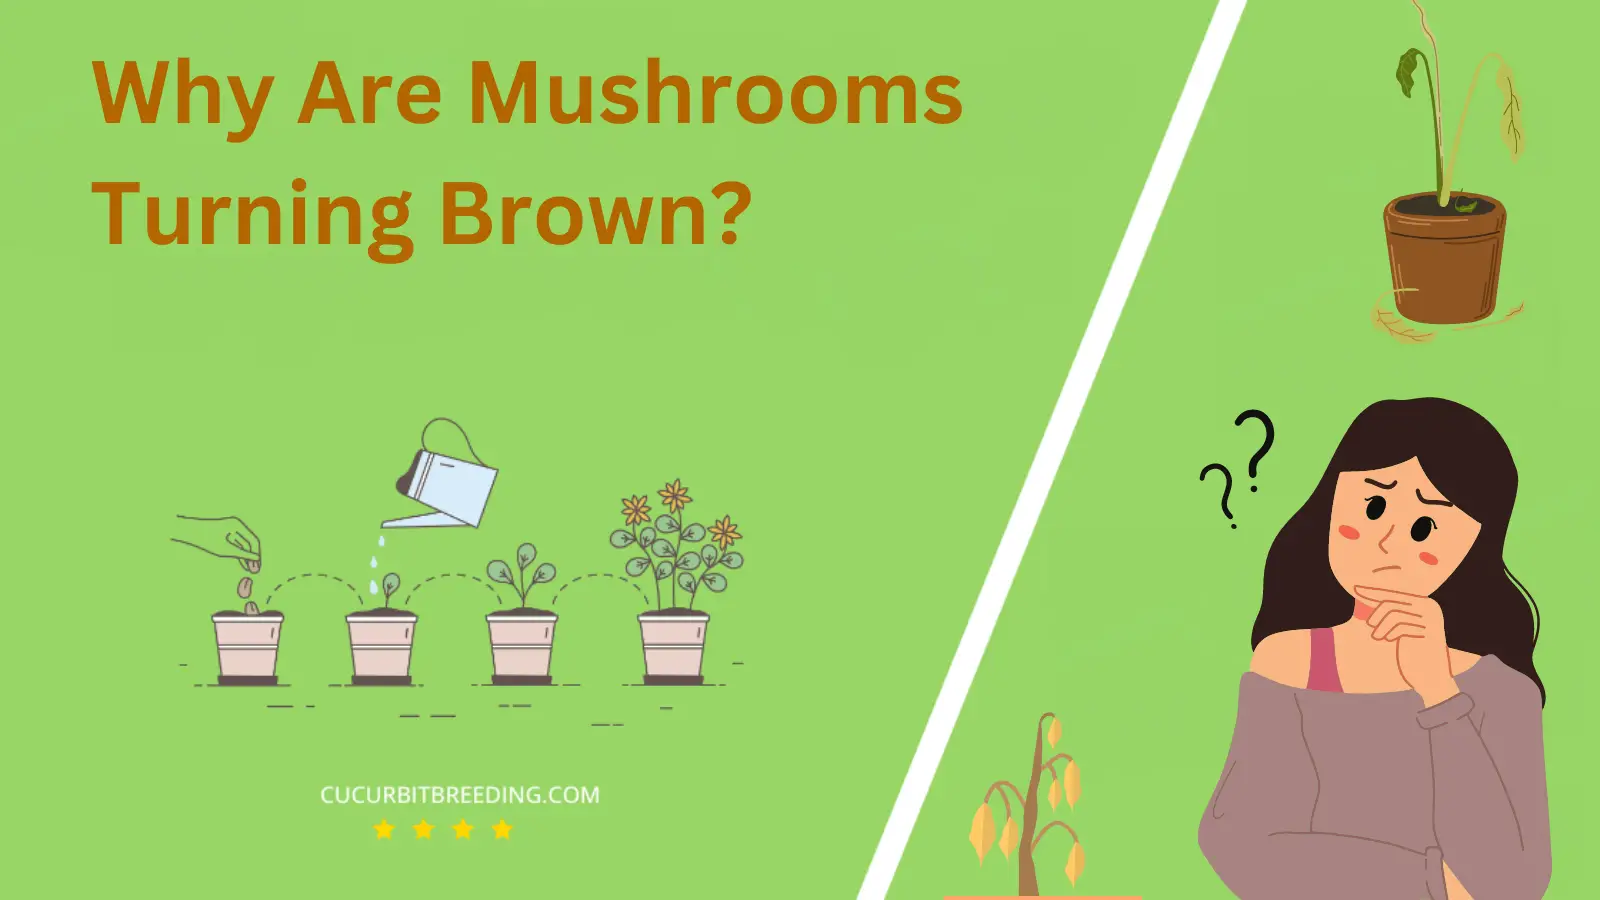 Why Are Mushrooms Turning Brown